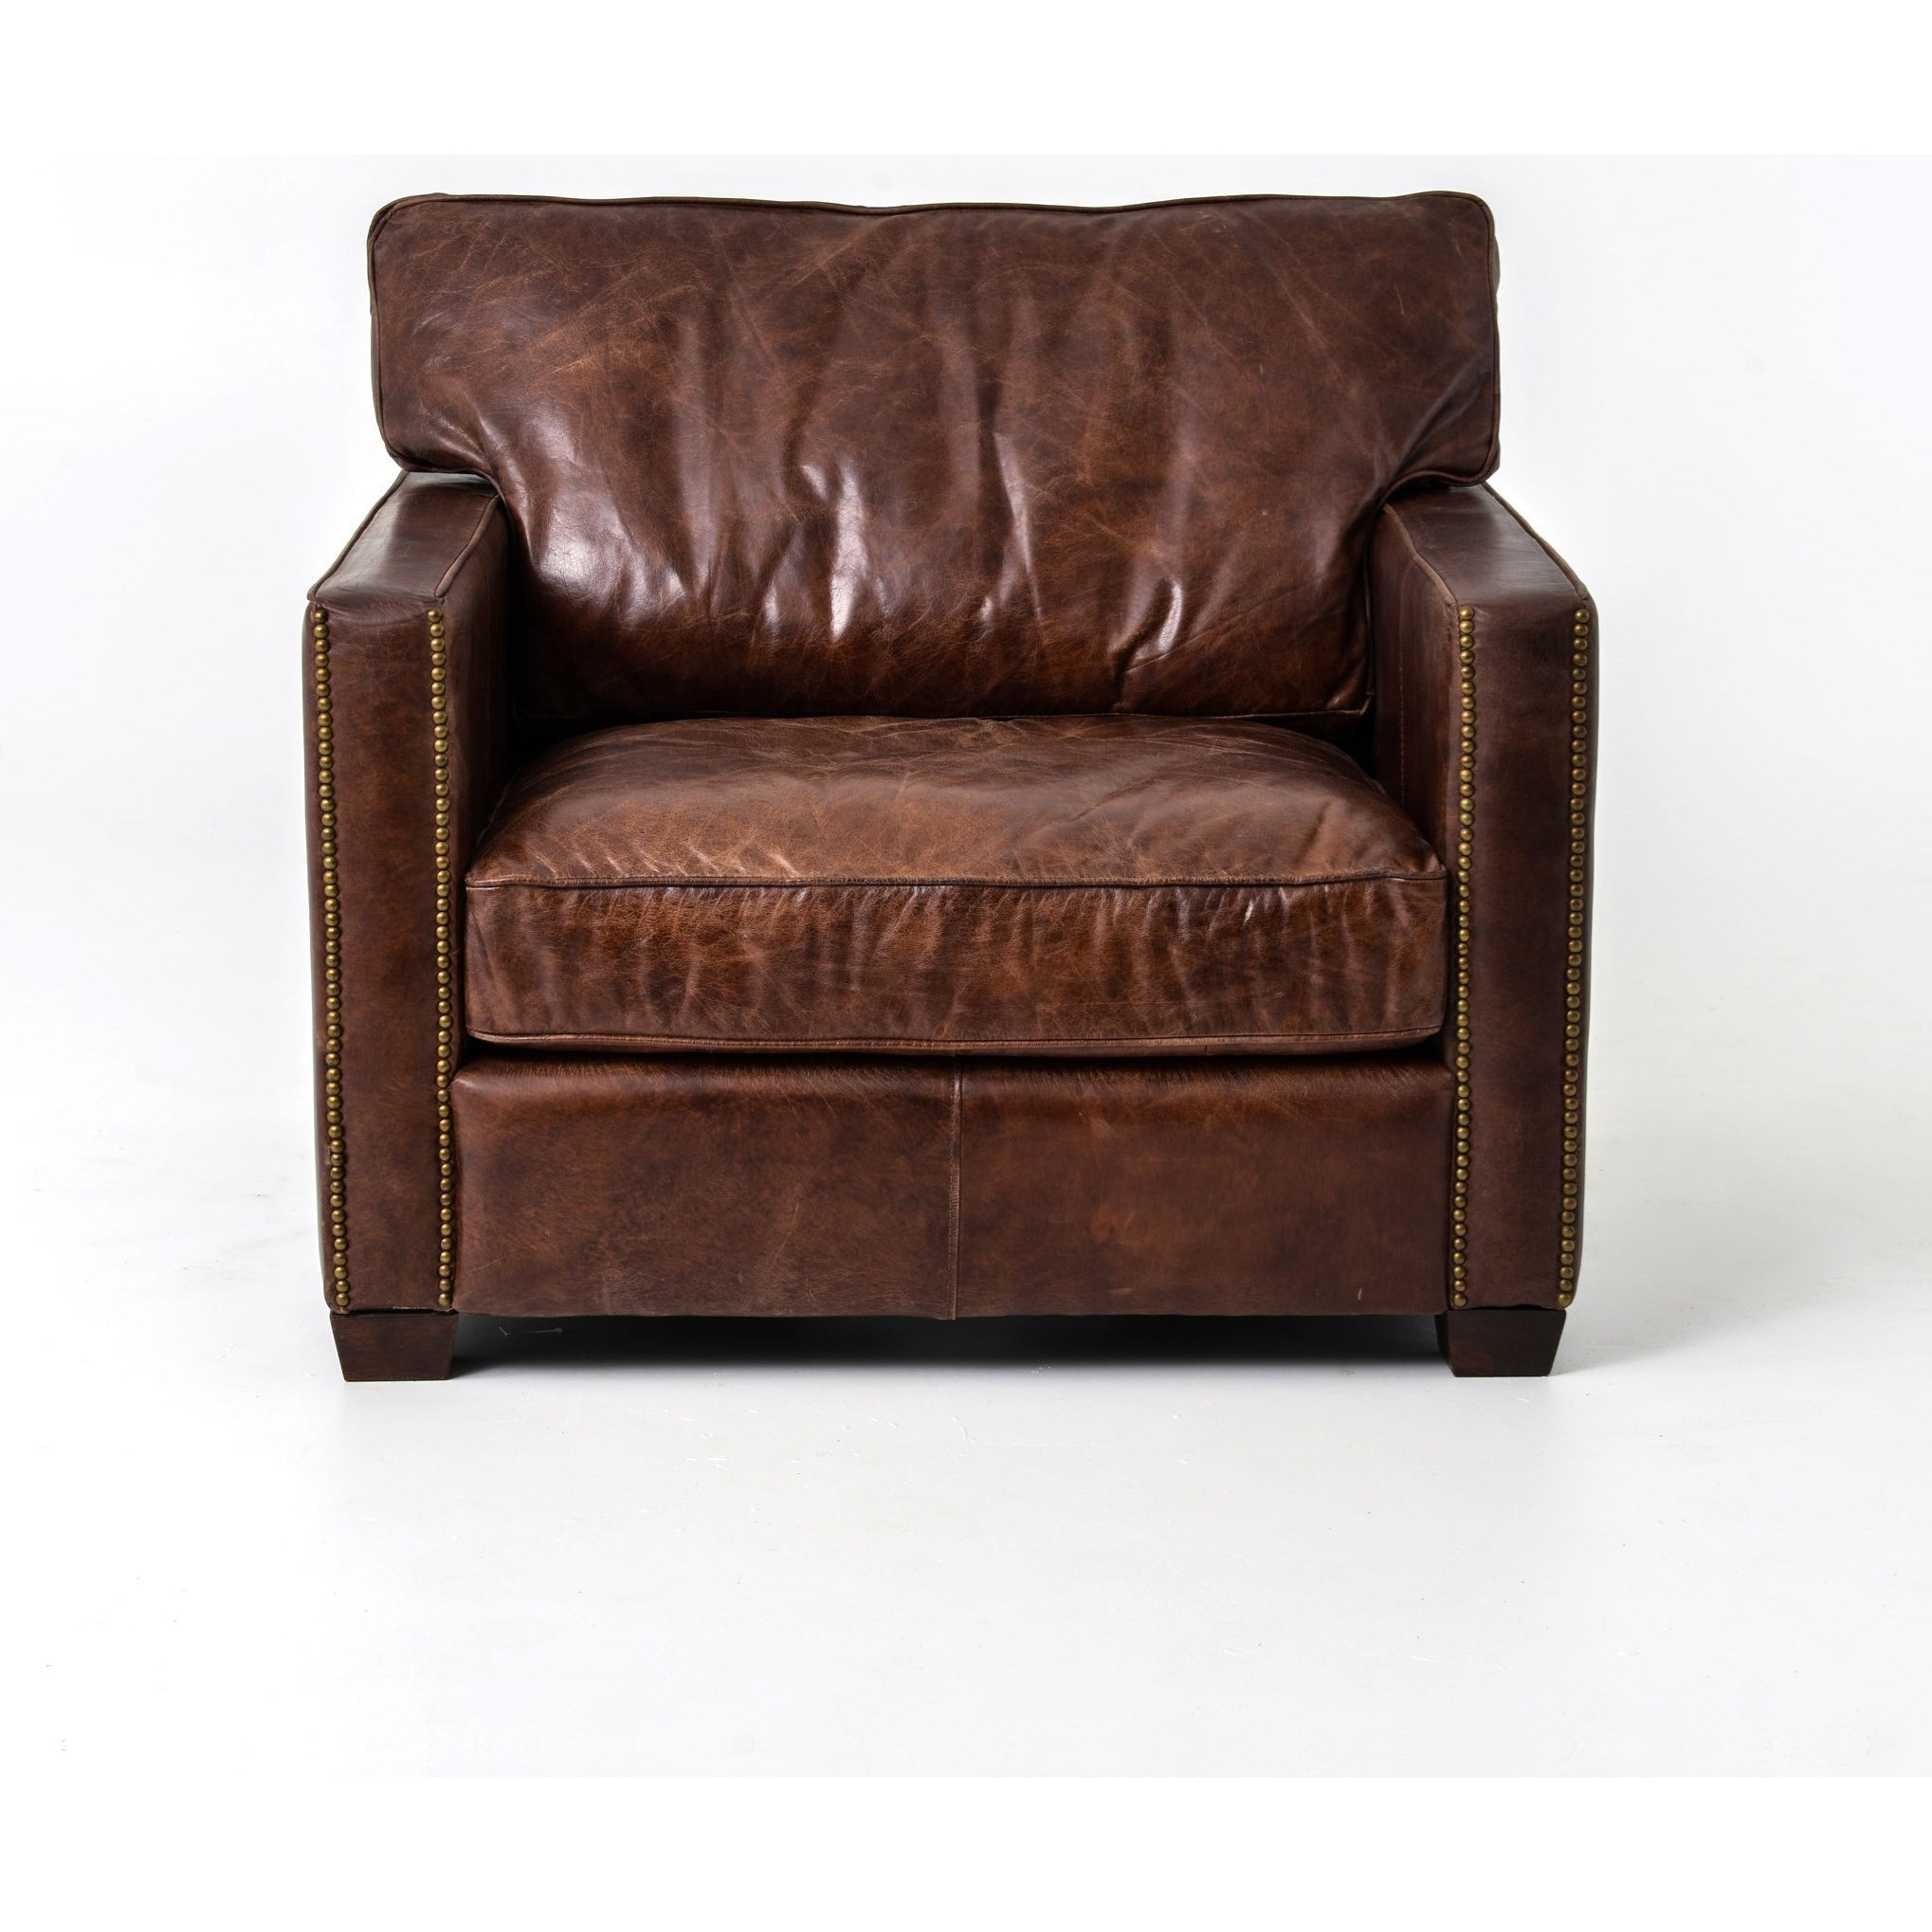 Larkin Club Chair with Cigar Leather Upholstery